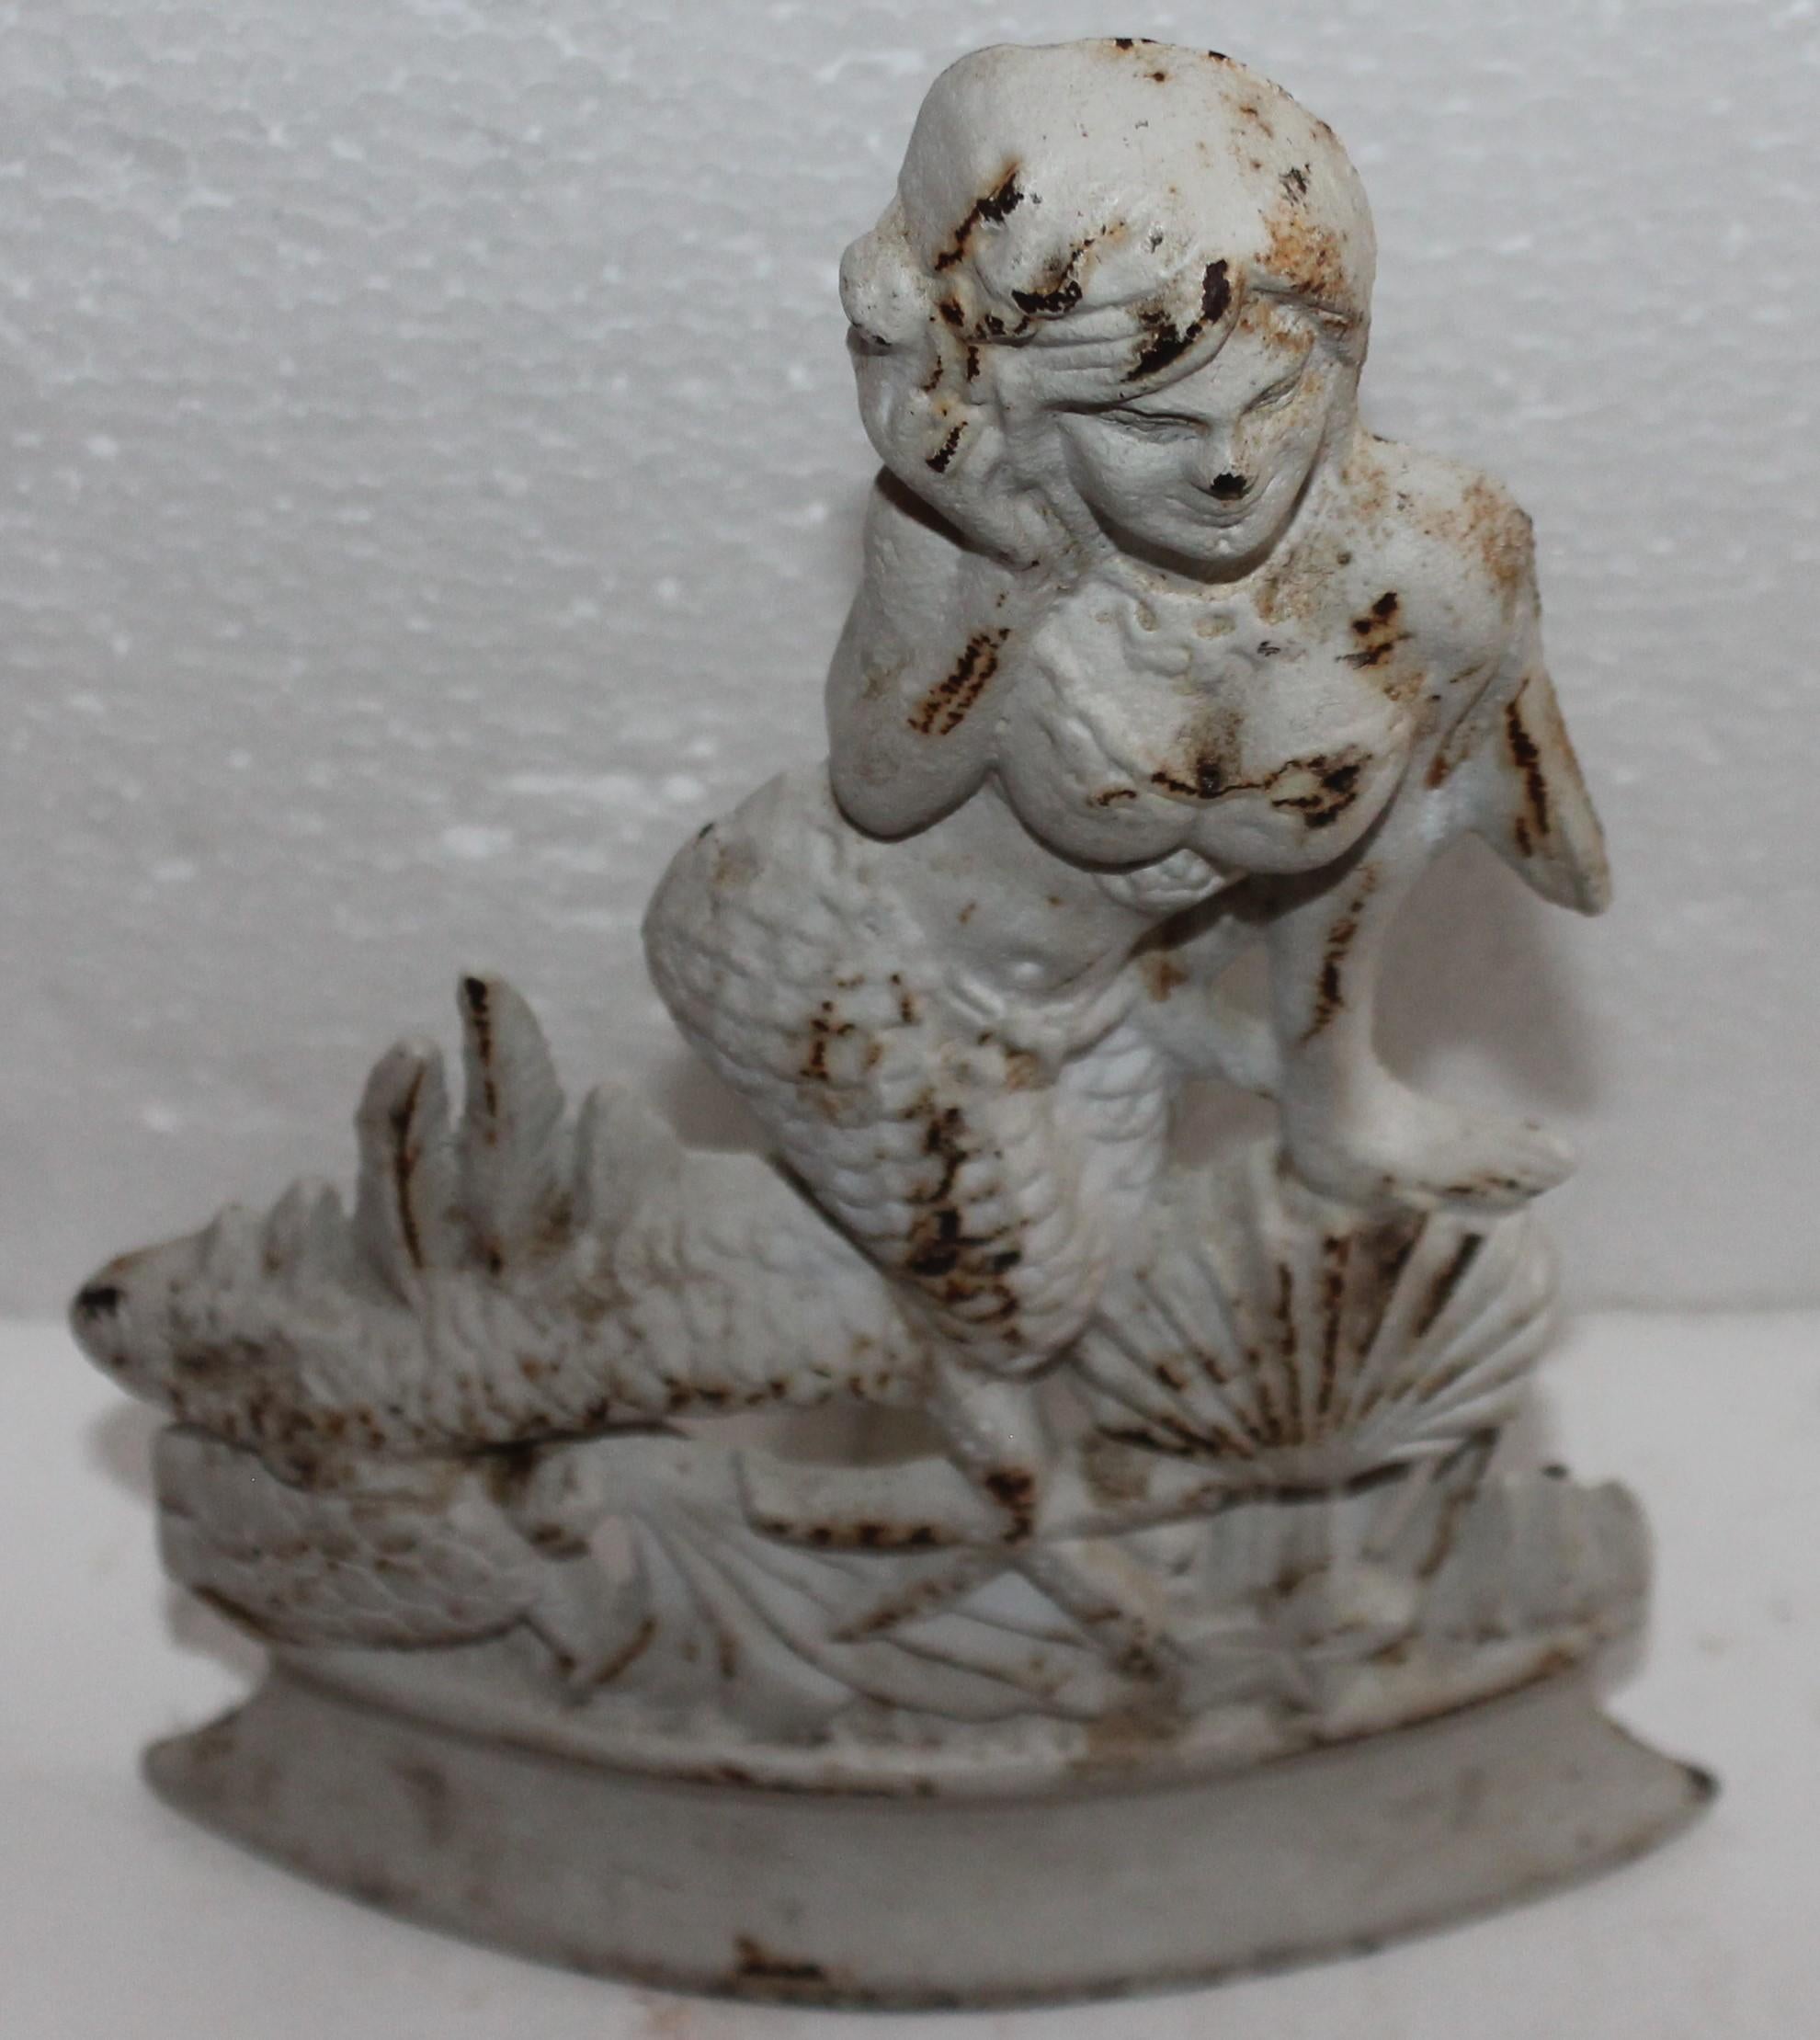 20th century mermaid original cream painted cast iron door stop. The condition is good with wear consistent from age and use.